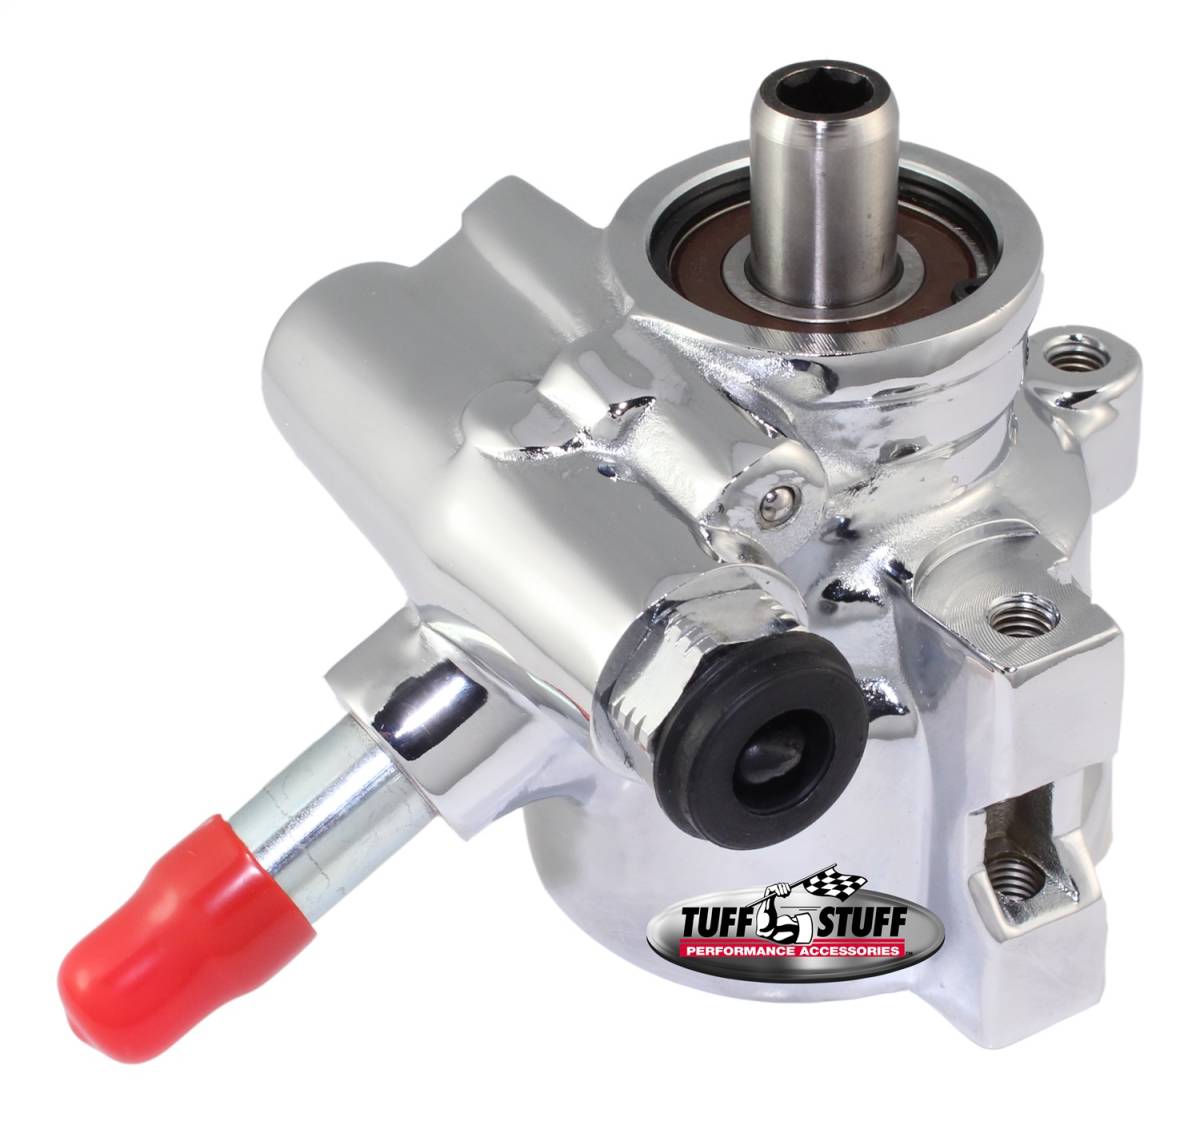 Tuff Stuff Performance - Type II Alum. Power Steering Pump M16 And 5/8 in. OD Return Tube M8x1.25 Threaded Hole Mounting Aluminum For Street Rods/Custom Vehicles w/Limited Engine Space Polished 6175ALP-4